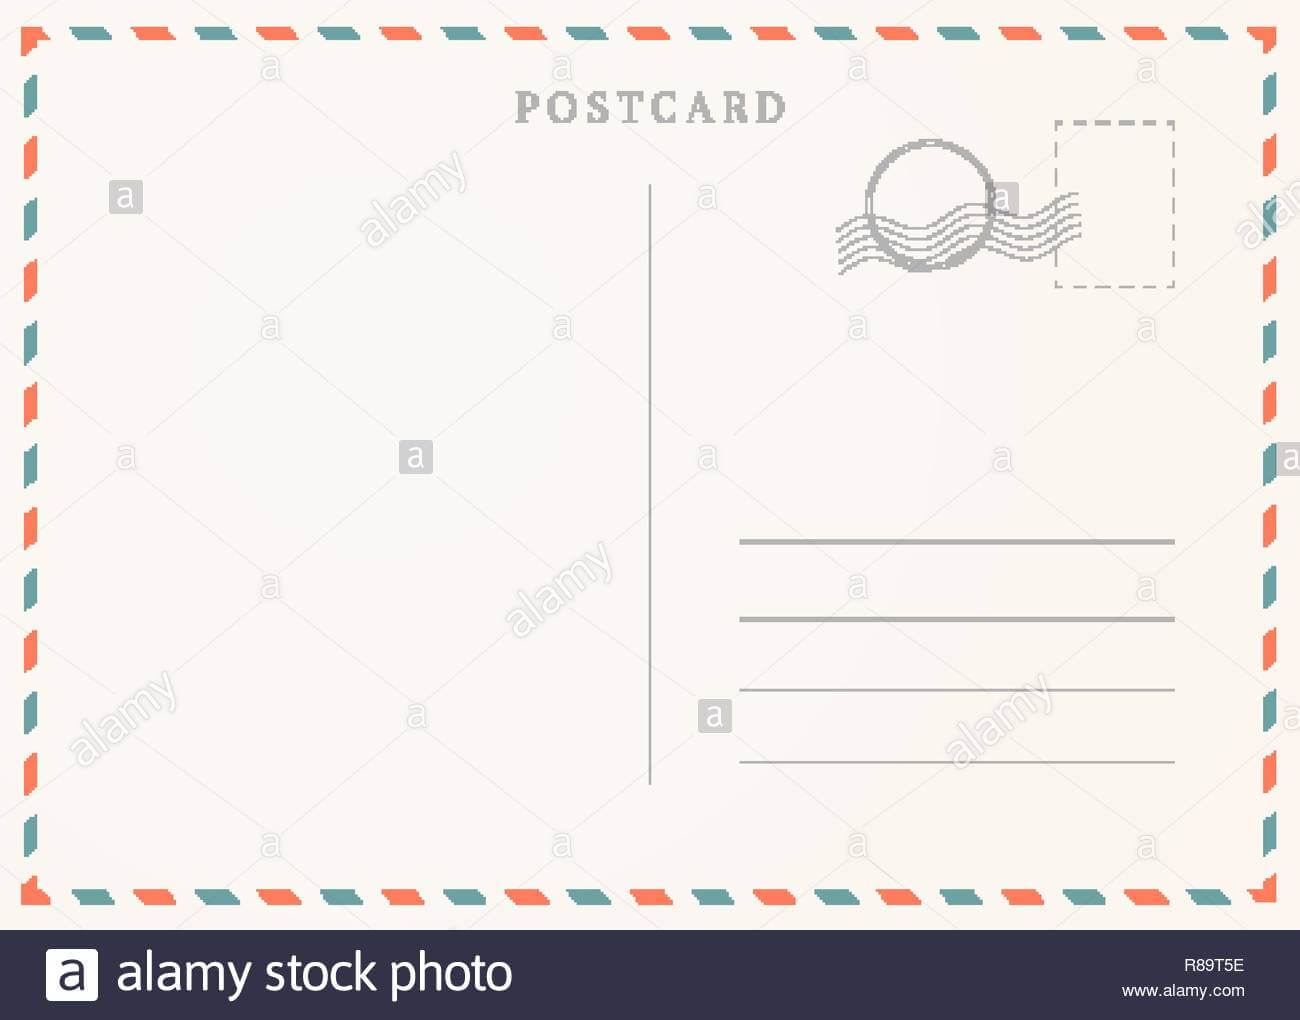 Vintage Postcard Template. Postal Card Illustration For With Airmail Postcard Template